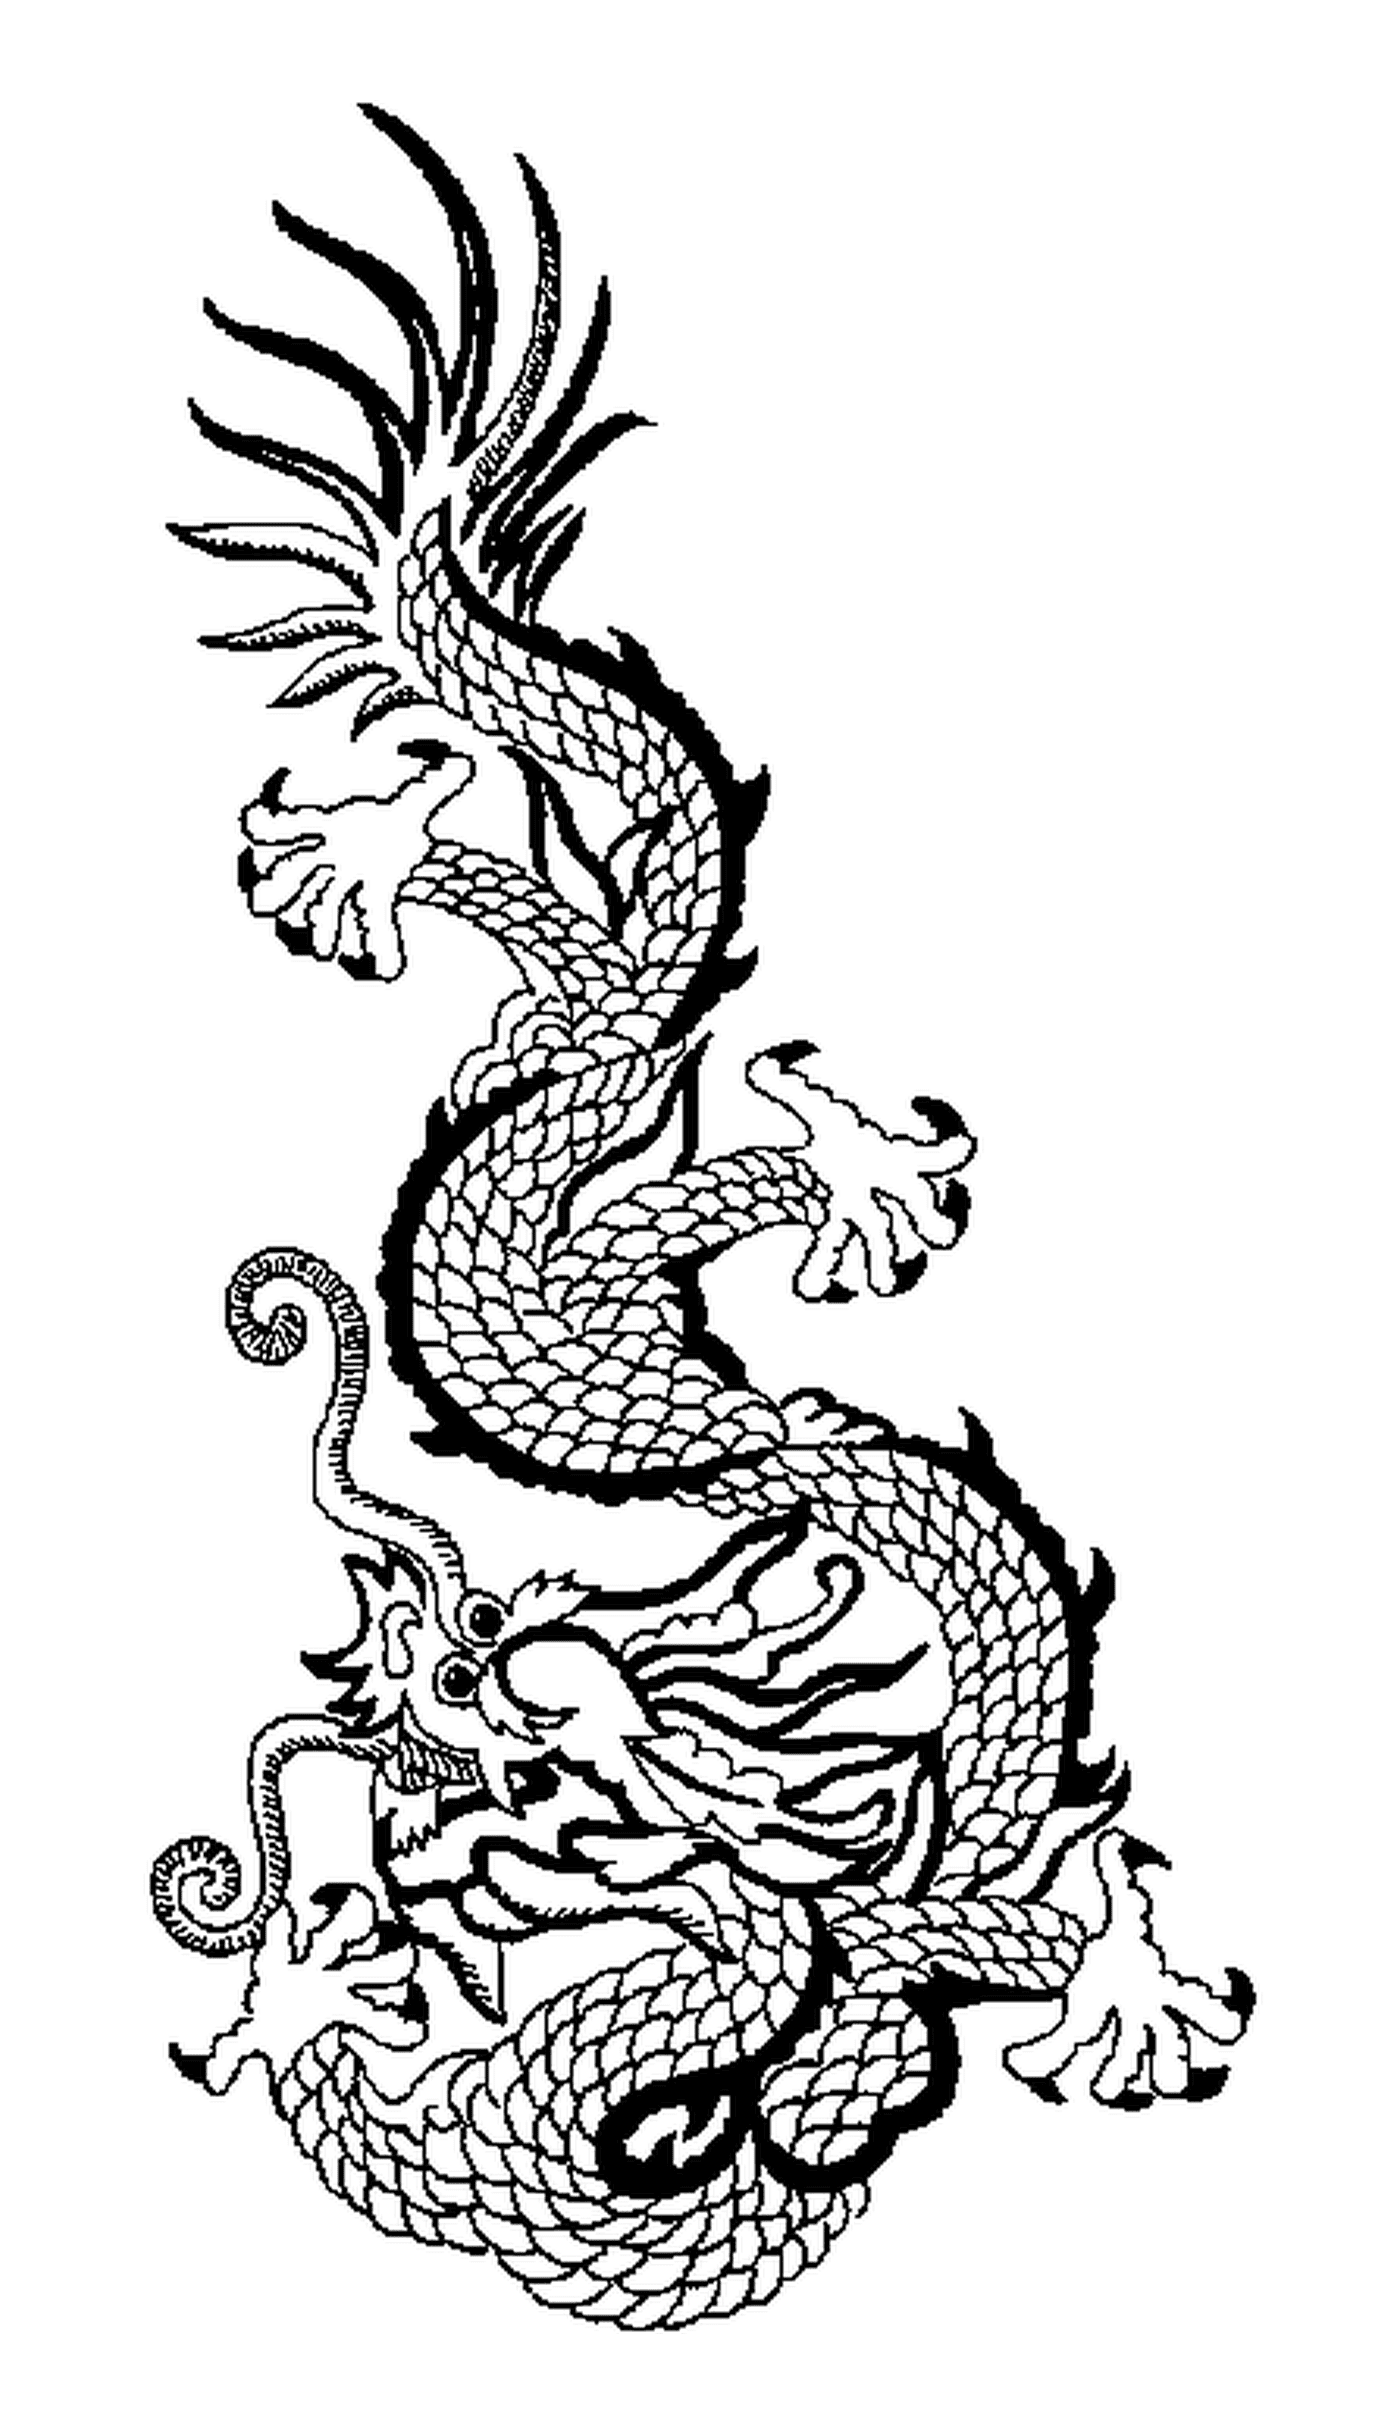  A Chinese dragon 